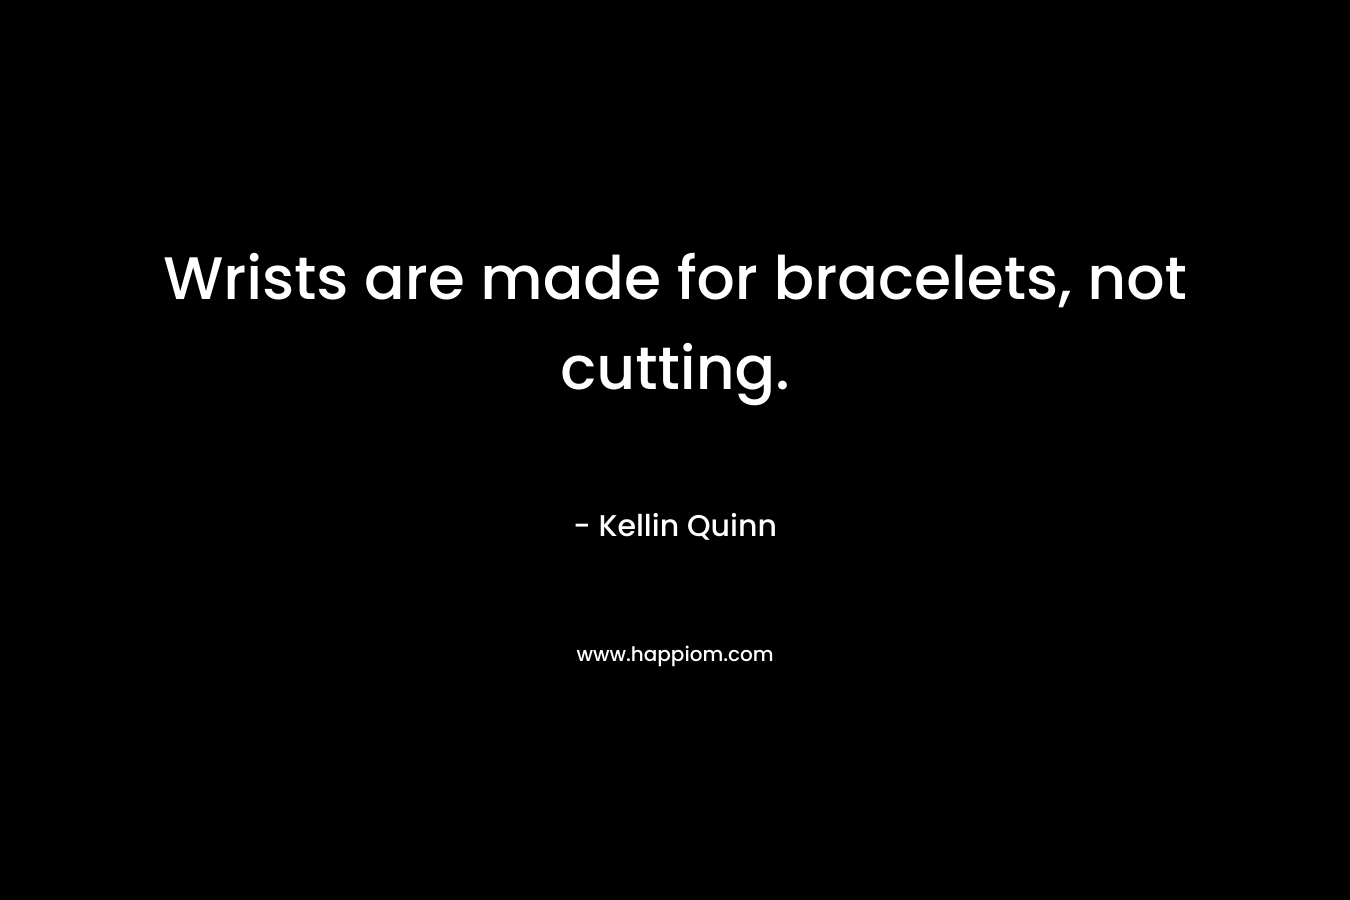 Wrists are made for bracelets, not cutting. – Kellin Quinn